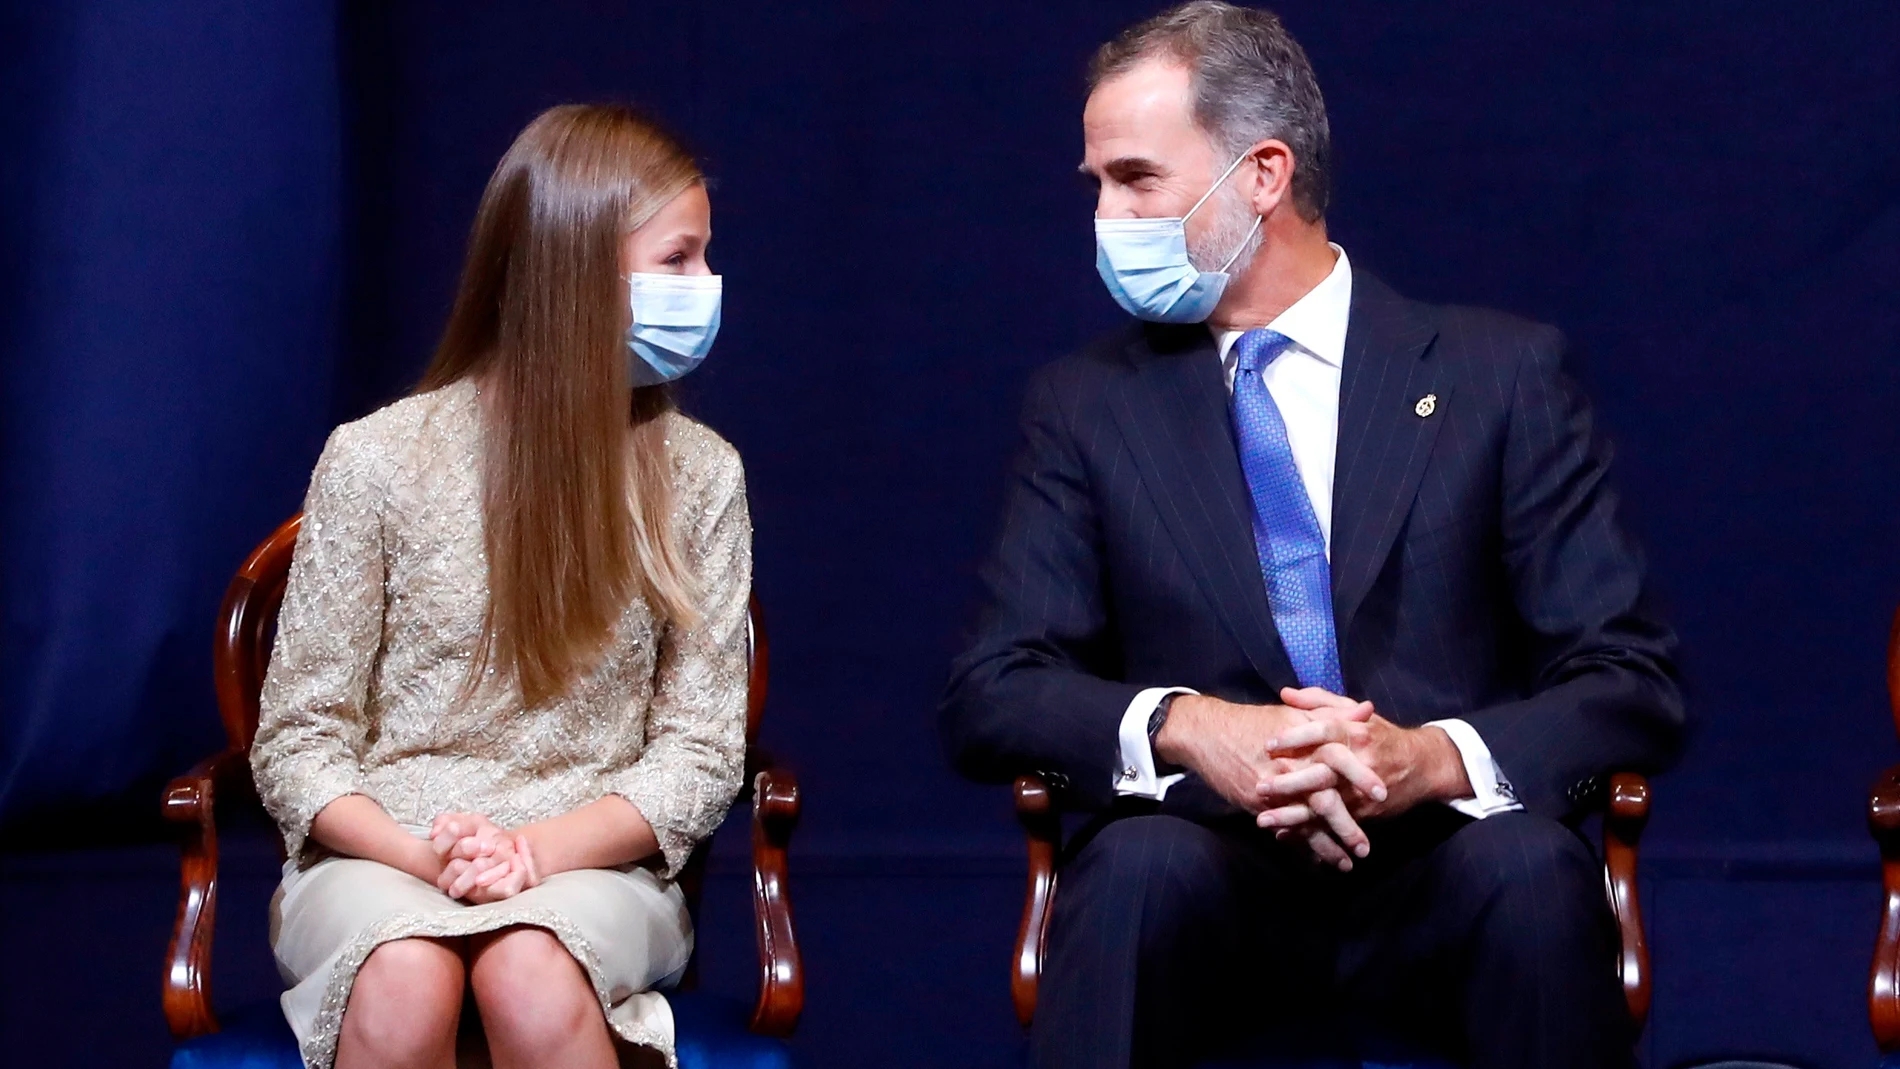 Spain's Crown Princess Leonor (L) and King Felipe VI during the delivery of Princess of Asturias Awards 2020, in Oviedo, on Friday 16 October 2020.